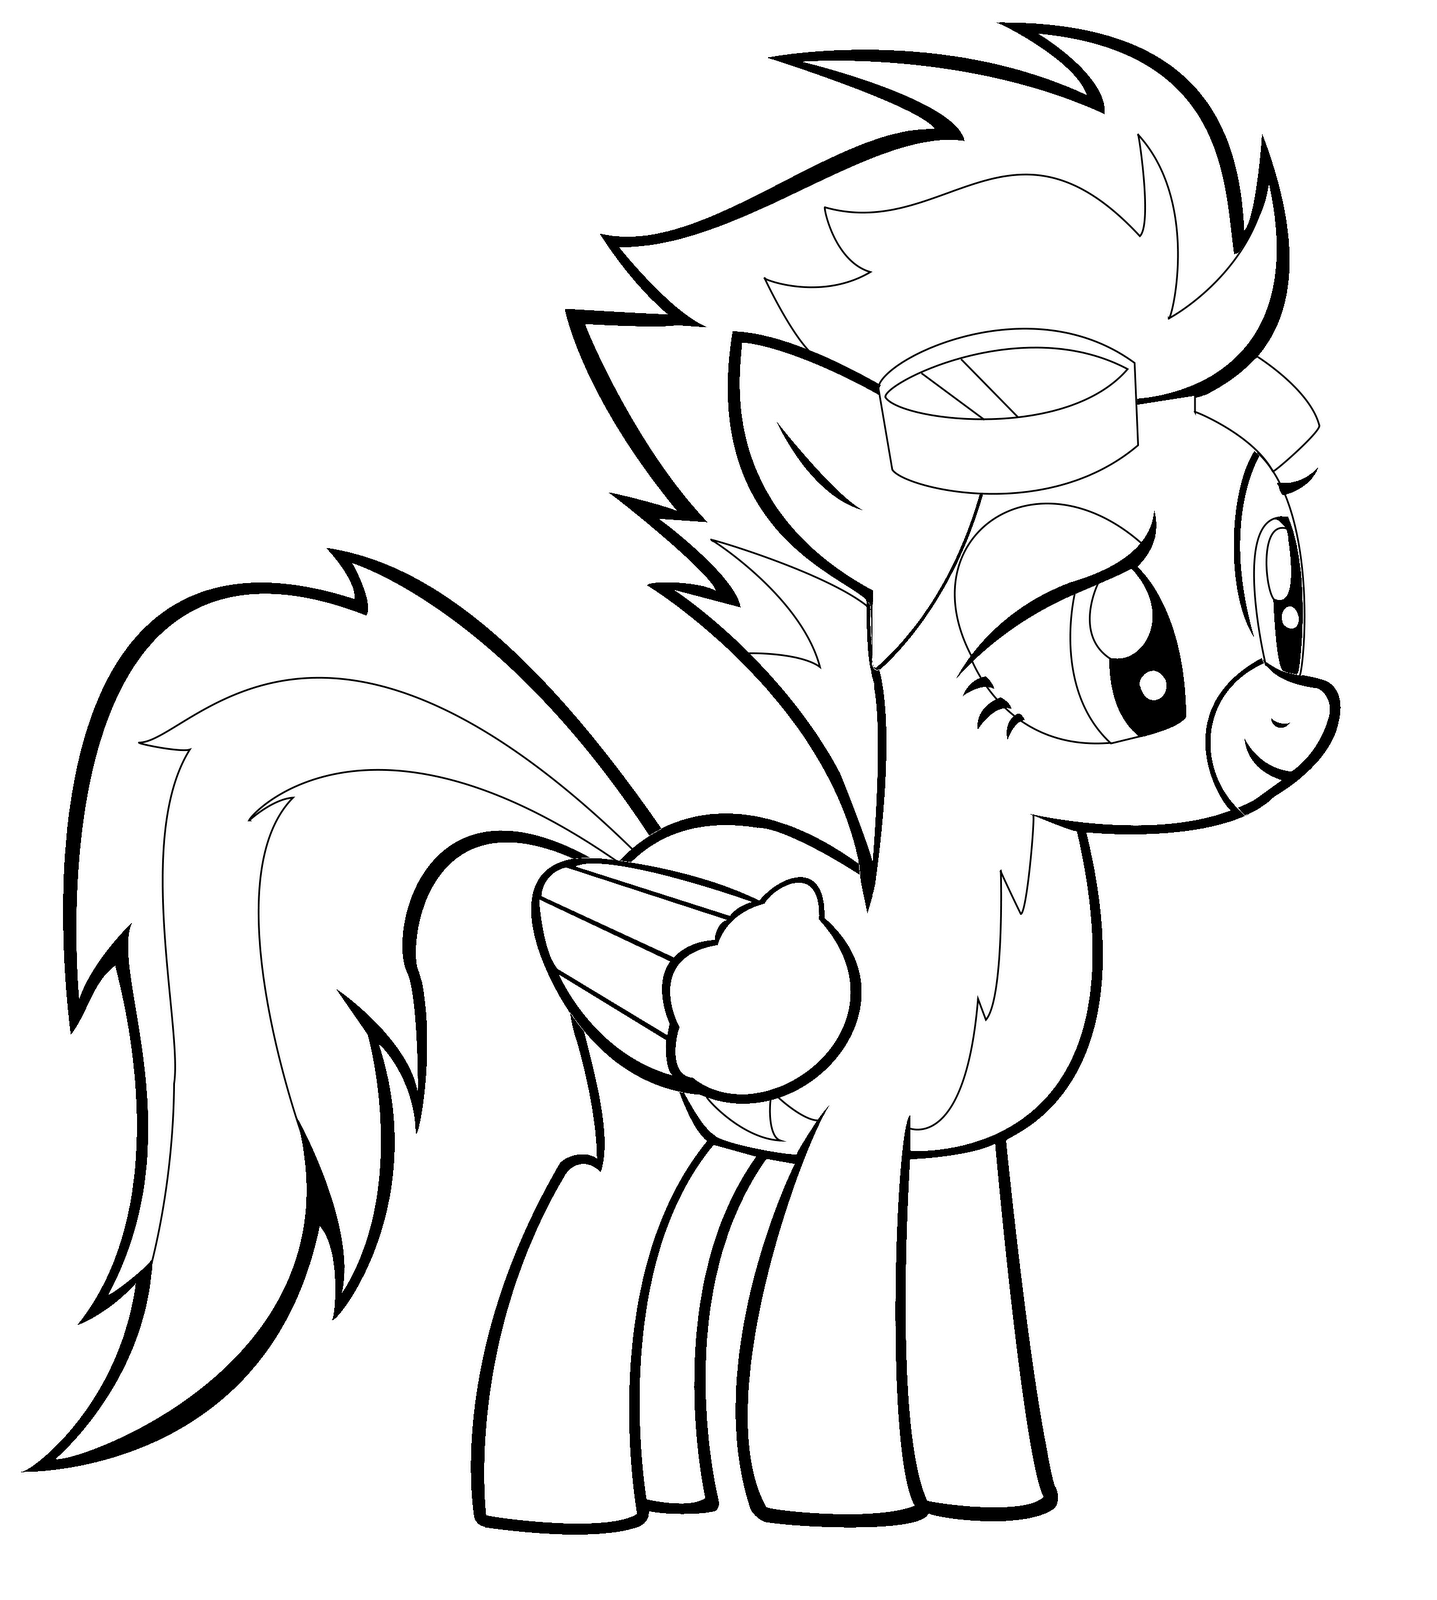 Spitfire Coloring Page